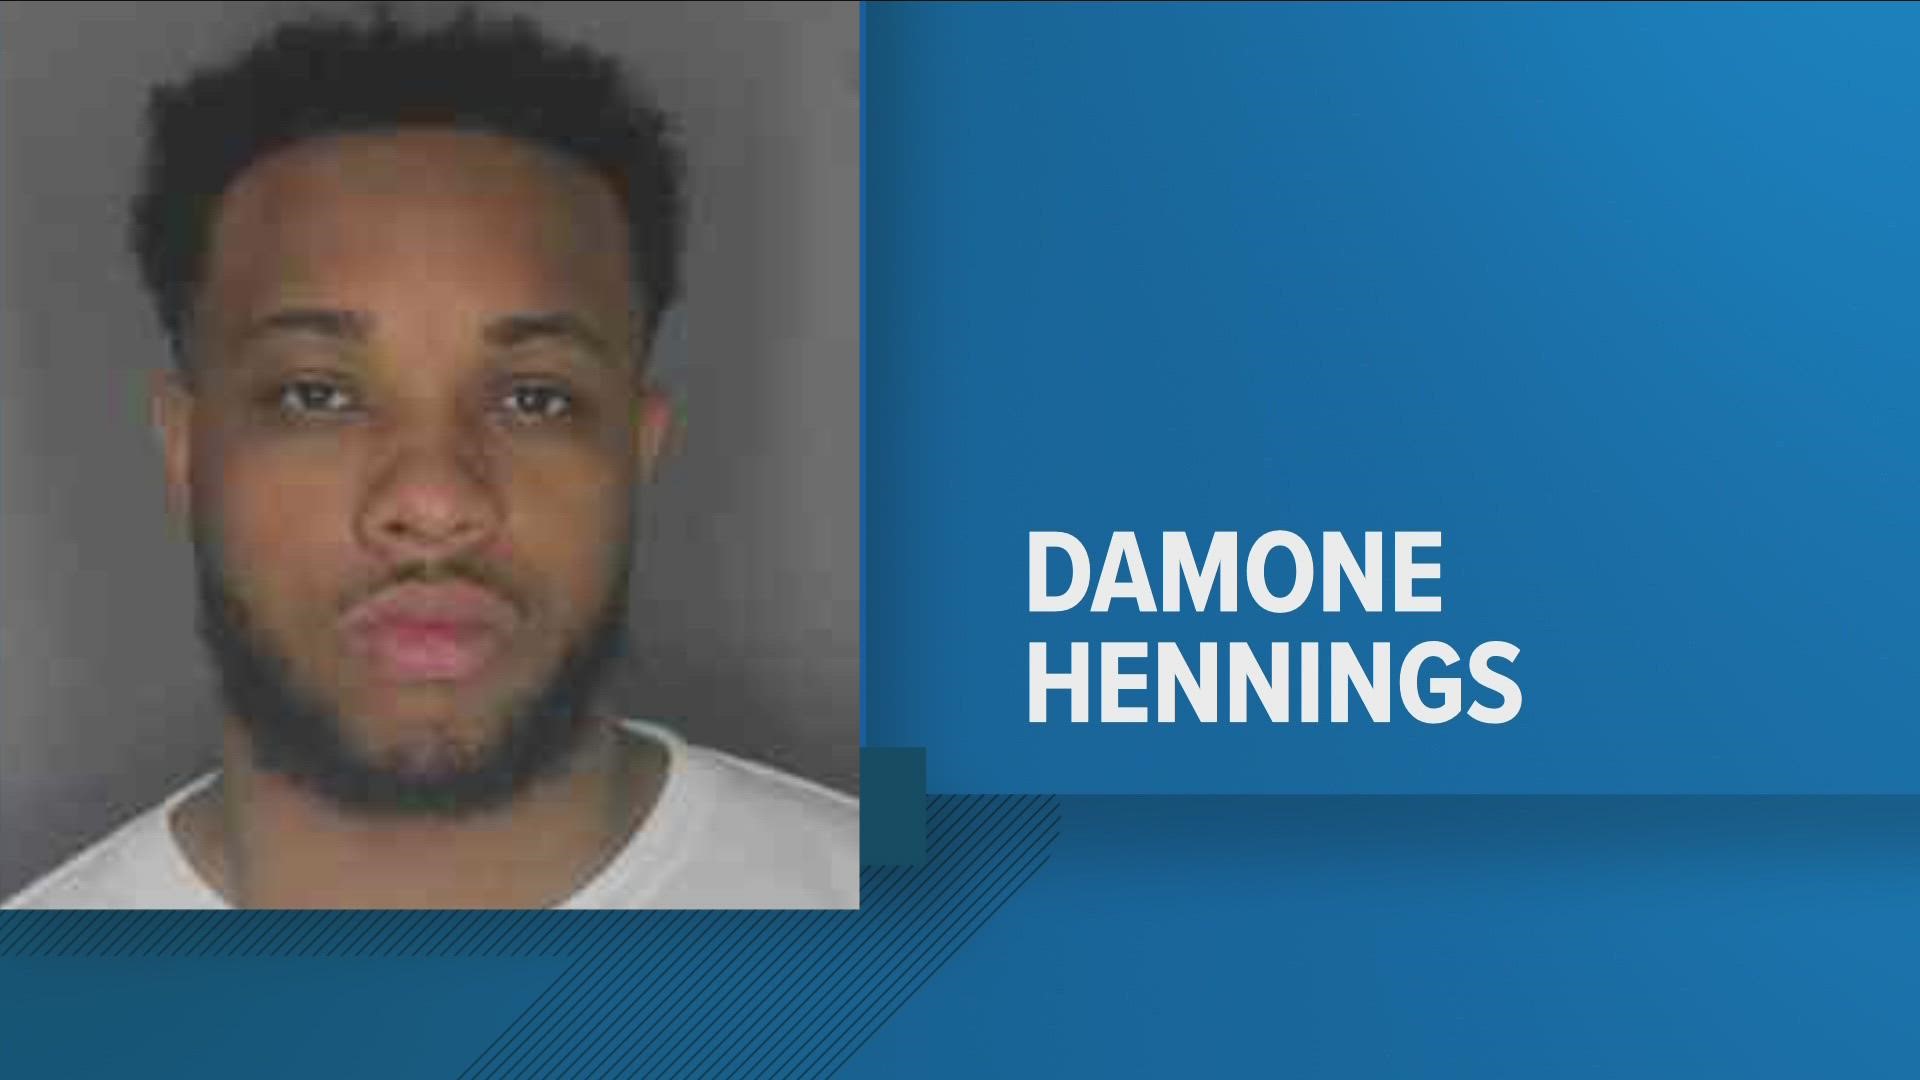 Damone A. Hennings, 30, of Buffalo, pleaded guilty in Erie County Court Thursday to one count of assault in the second degree.